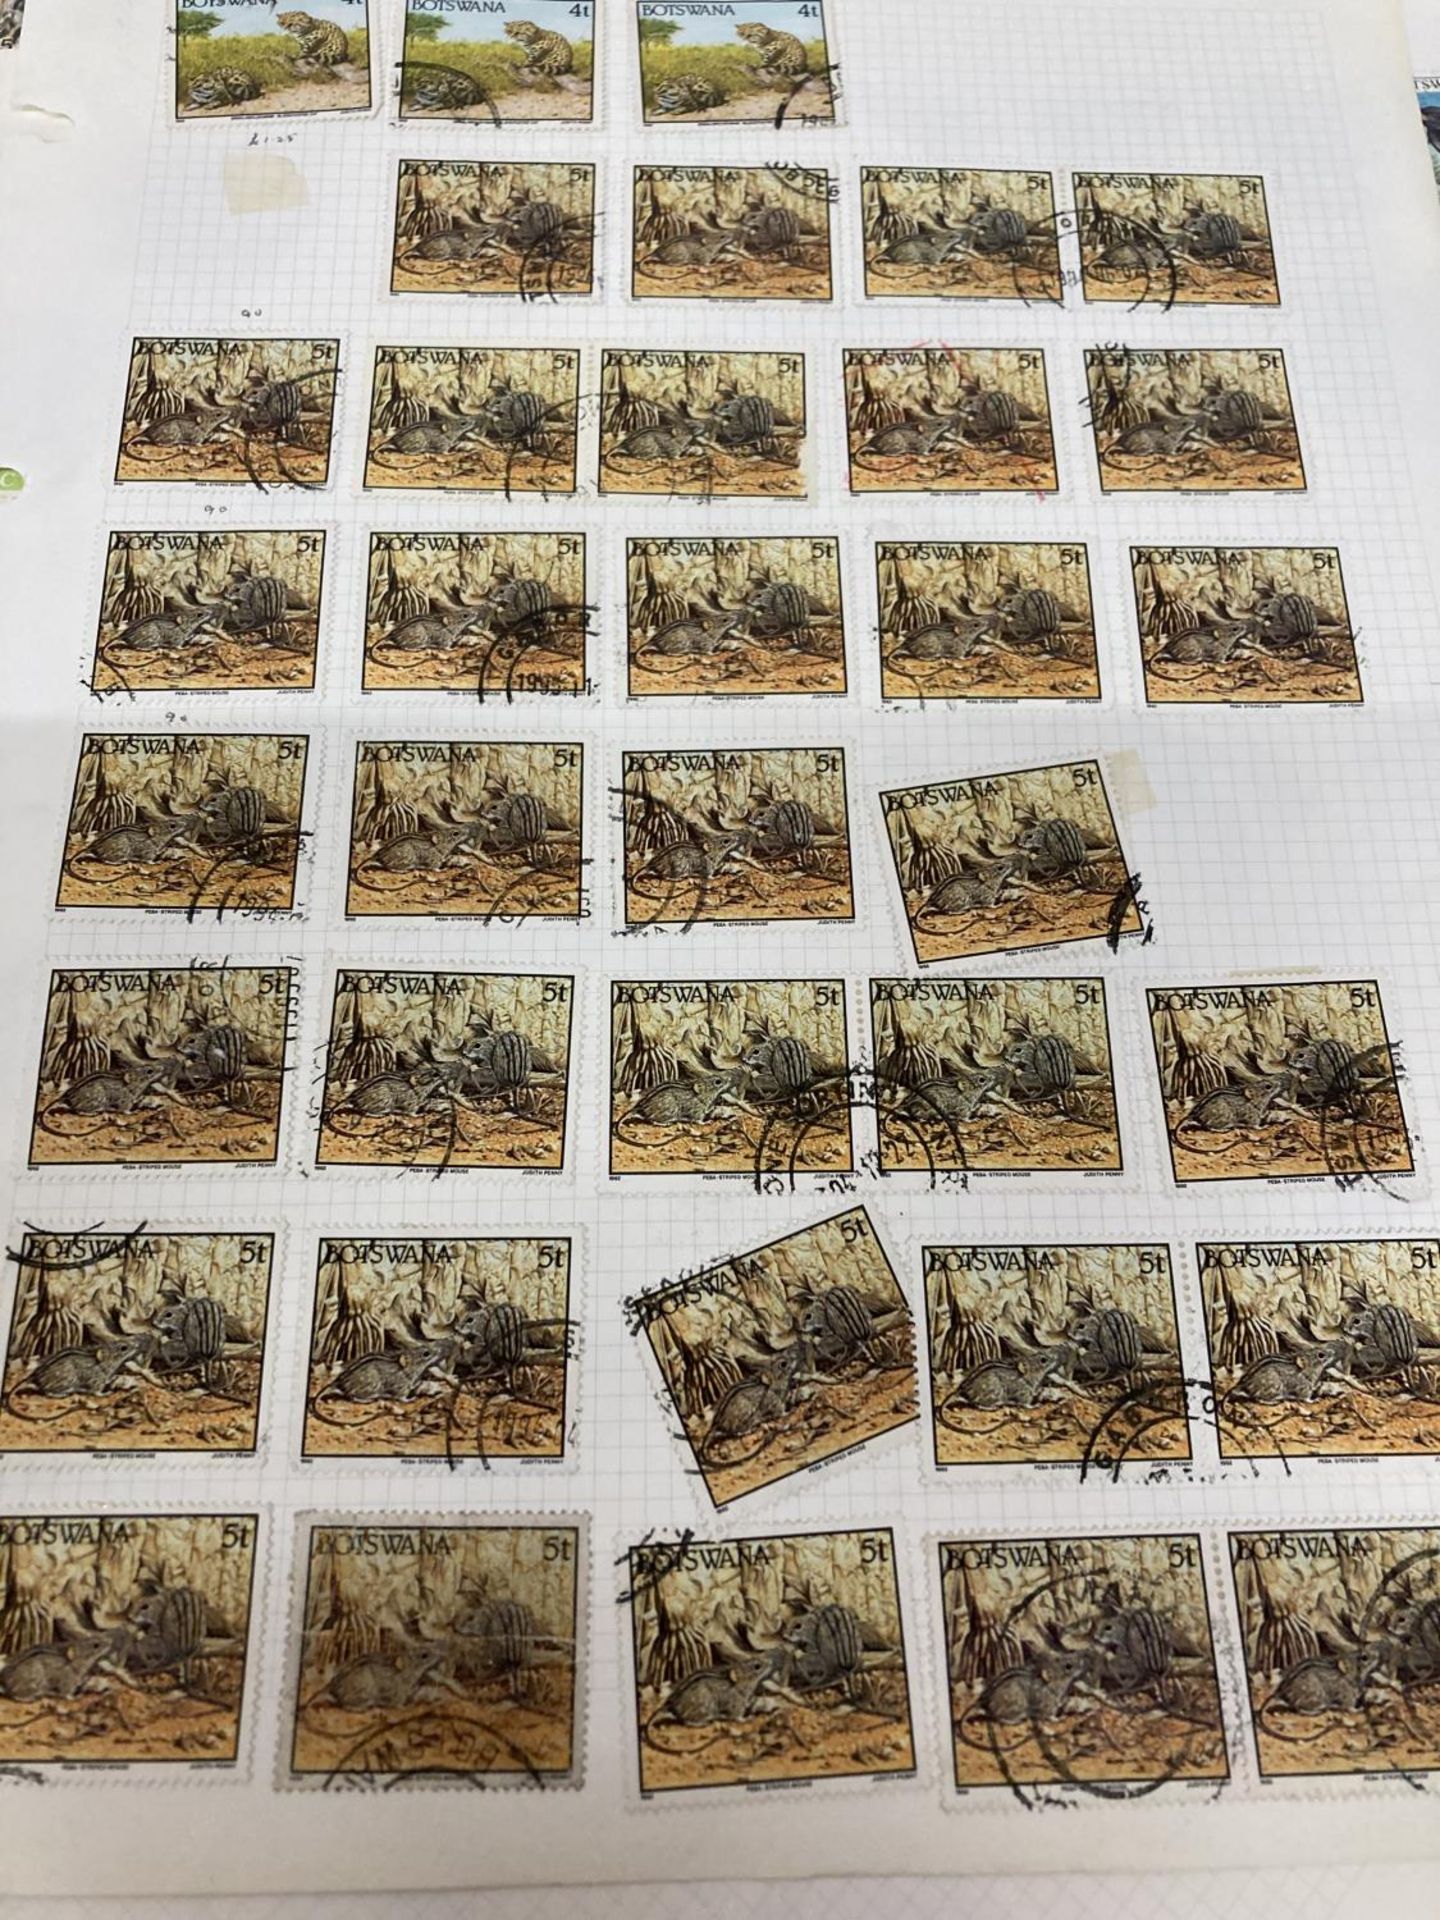 TEN PLUS SHEETS CONTAINING STAMPS FROM BOTSWANA - Image 4 of 6